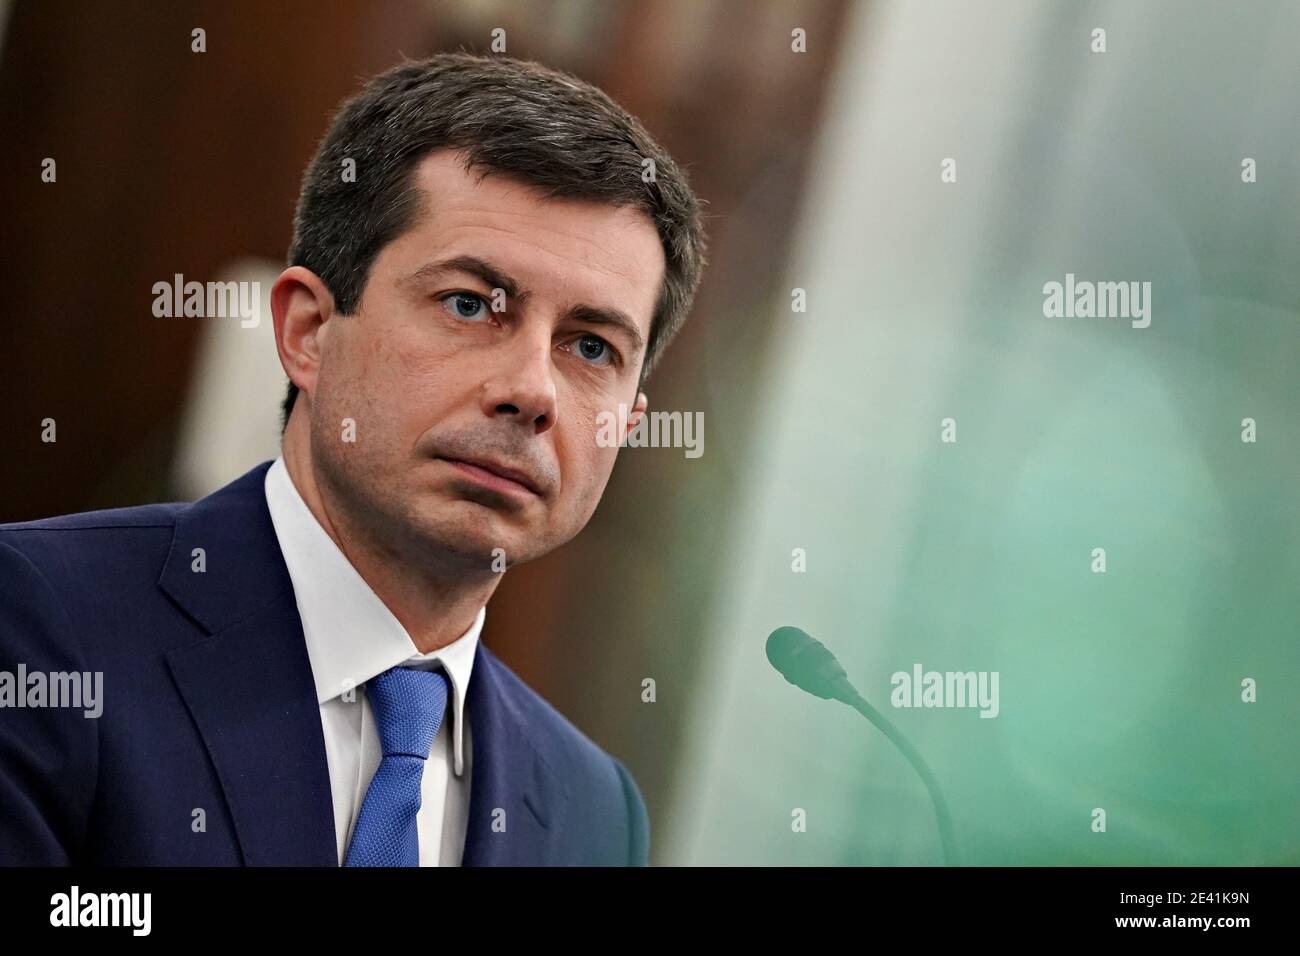 Washington, DC, USA. 21st Jan, 2021. Pete Buttigieg, U.S. secretary of transportation nominee for U.S. President Joe Biden, listens during a Senate Commerce, Science and Transportation Committee confirmation hearing in Washington, DC, U.S., on Thursday, Jan. 21, 2021. Buttigieg, is pledging to carry out the administration's ambitious agenda to rebuild the nation's infrastructure, calling it a 'generational opportunity' to create new jobs, fight economic inequality and stem climate change.Credit: Stefani Reynolds/Pool via CNP | usage worldwide Credit: dpa/Alamy Live News Stock Photo